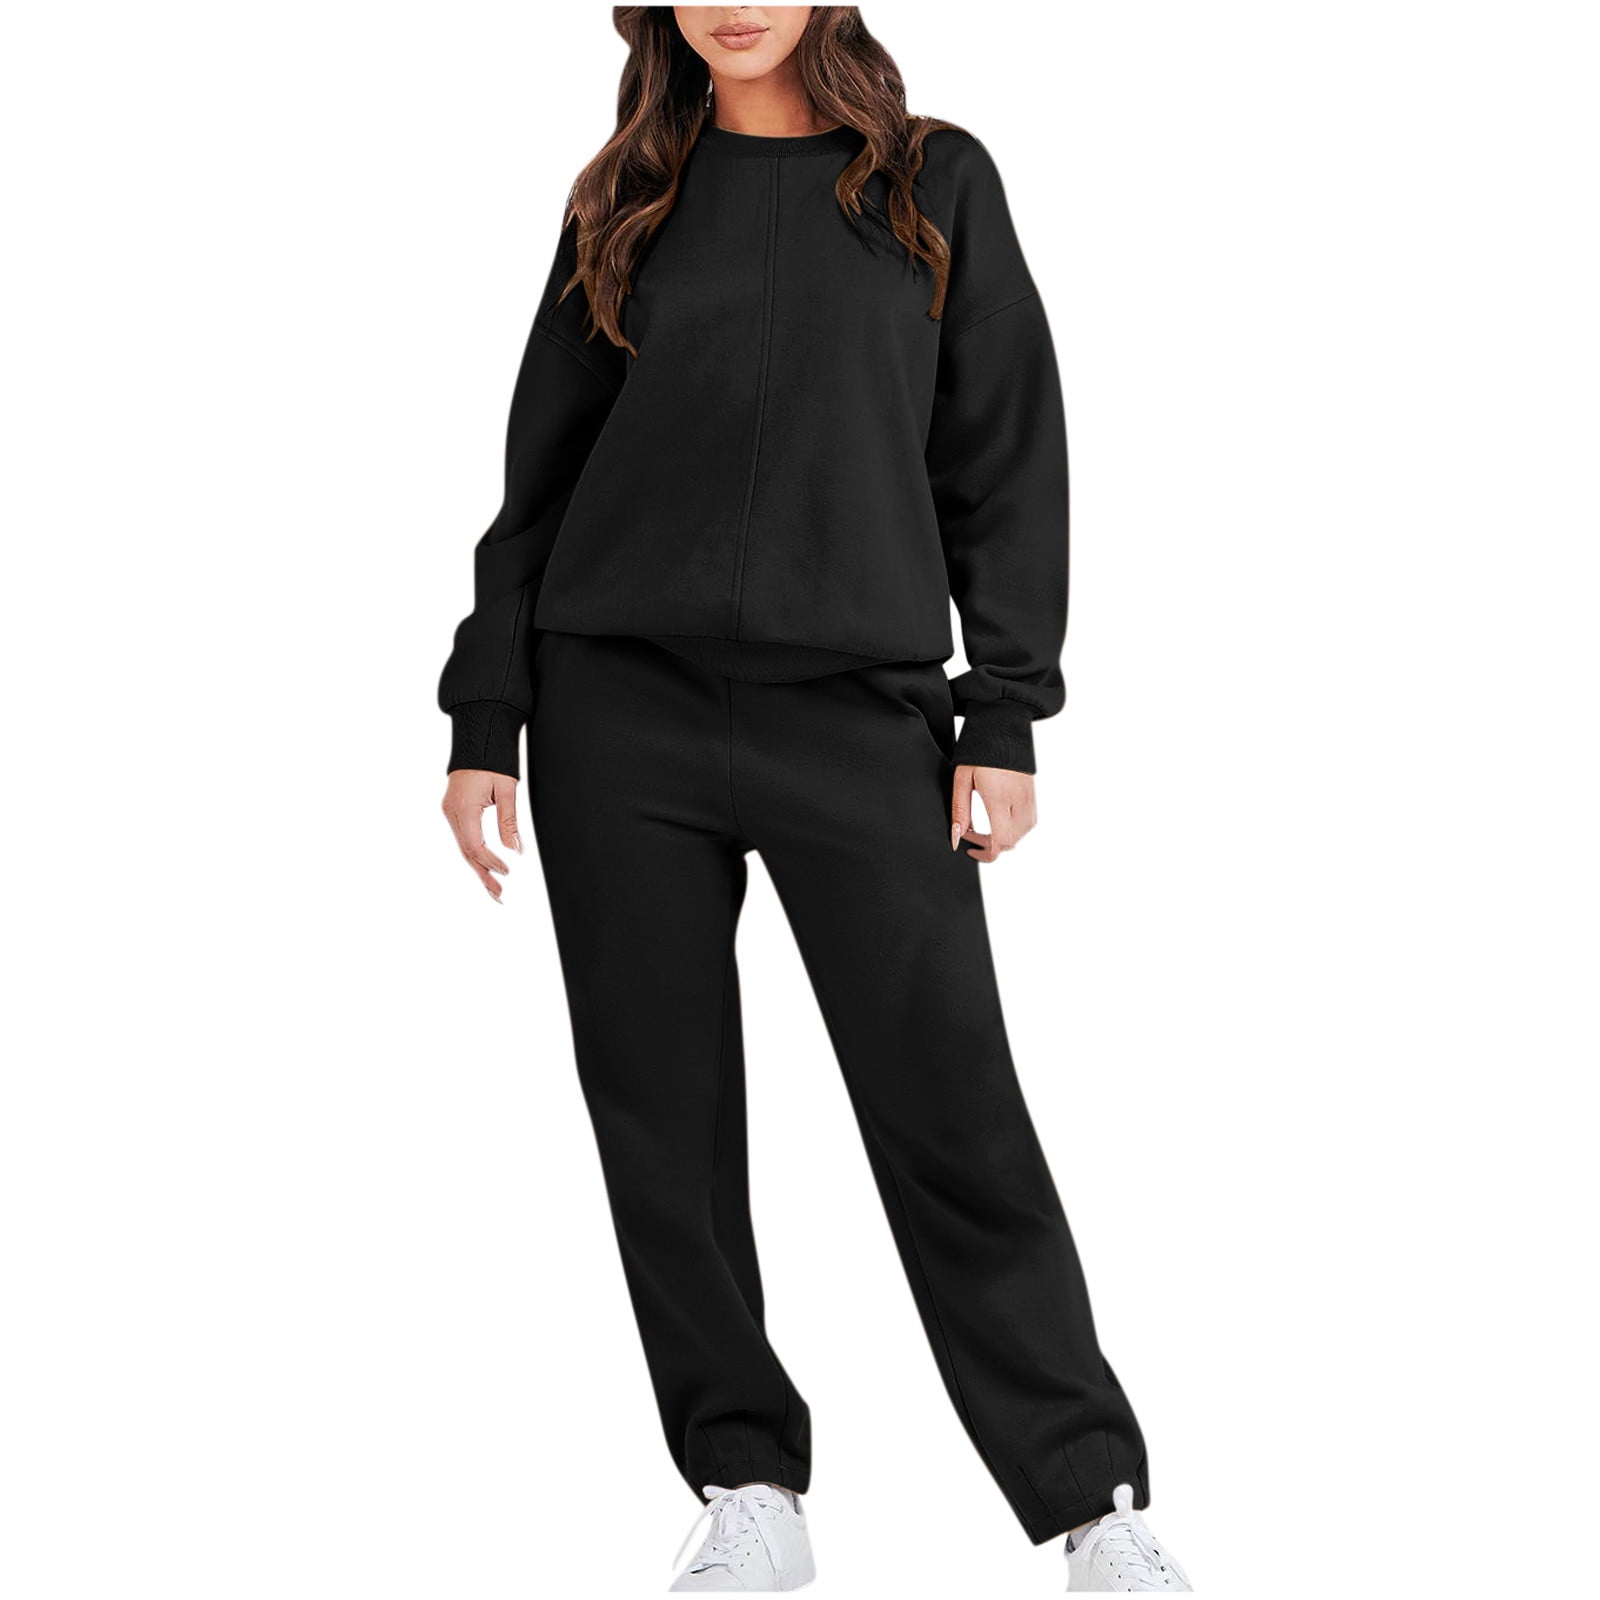 ZQGJB Women's 2023 Two Piece Sweatsuit Outfits Casual Long